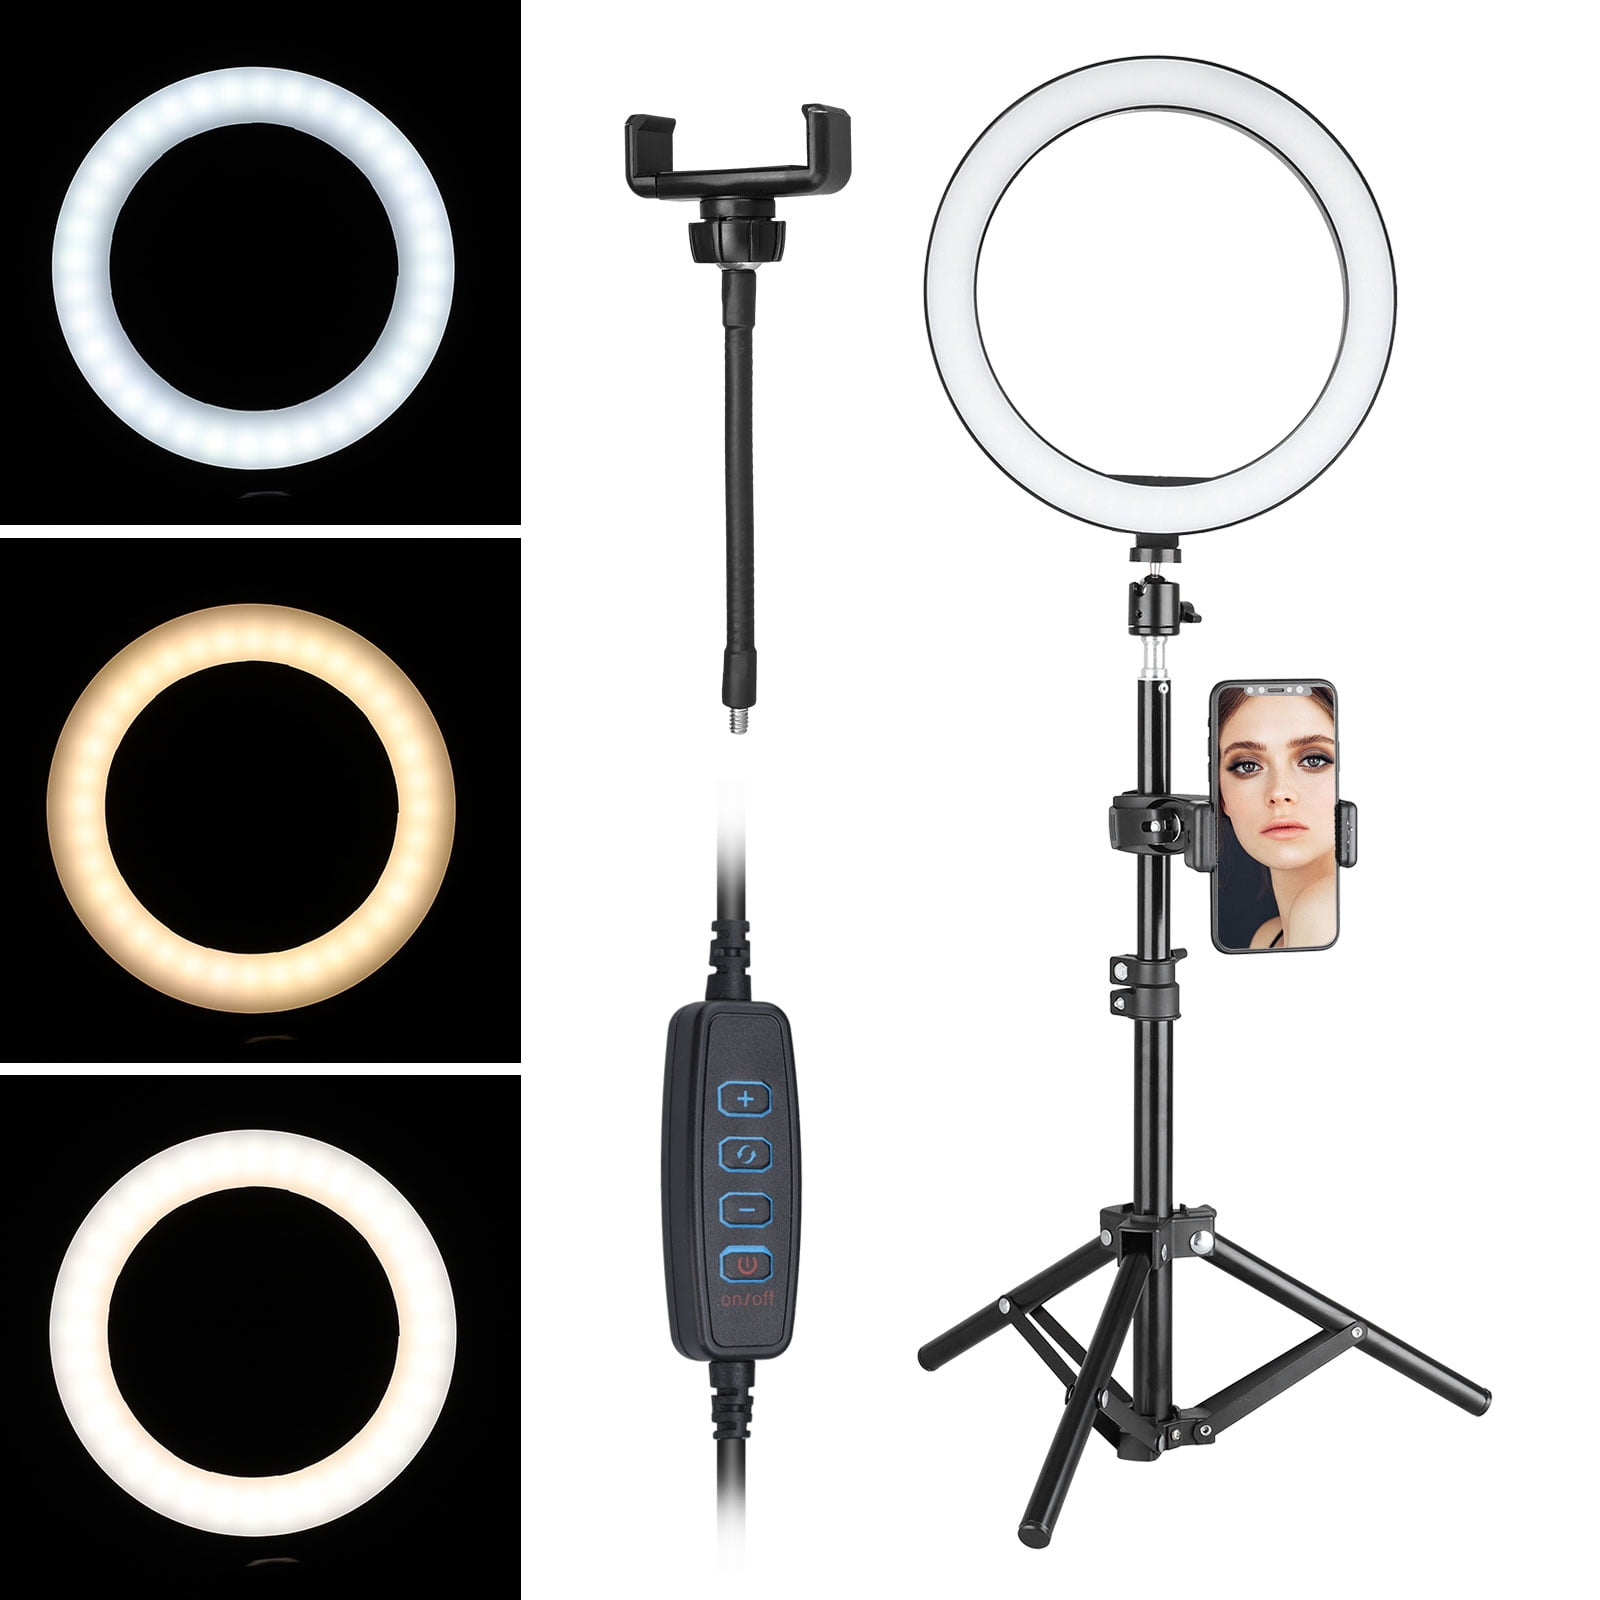 Fantastick Broadcast Live Photography Fill Light LED Camera Phone Flash Dimmable Light with Desktop Stand 